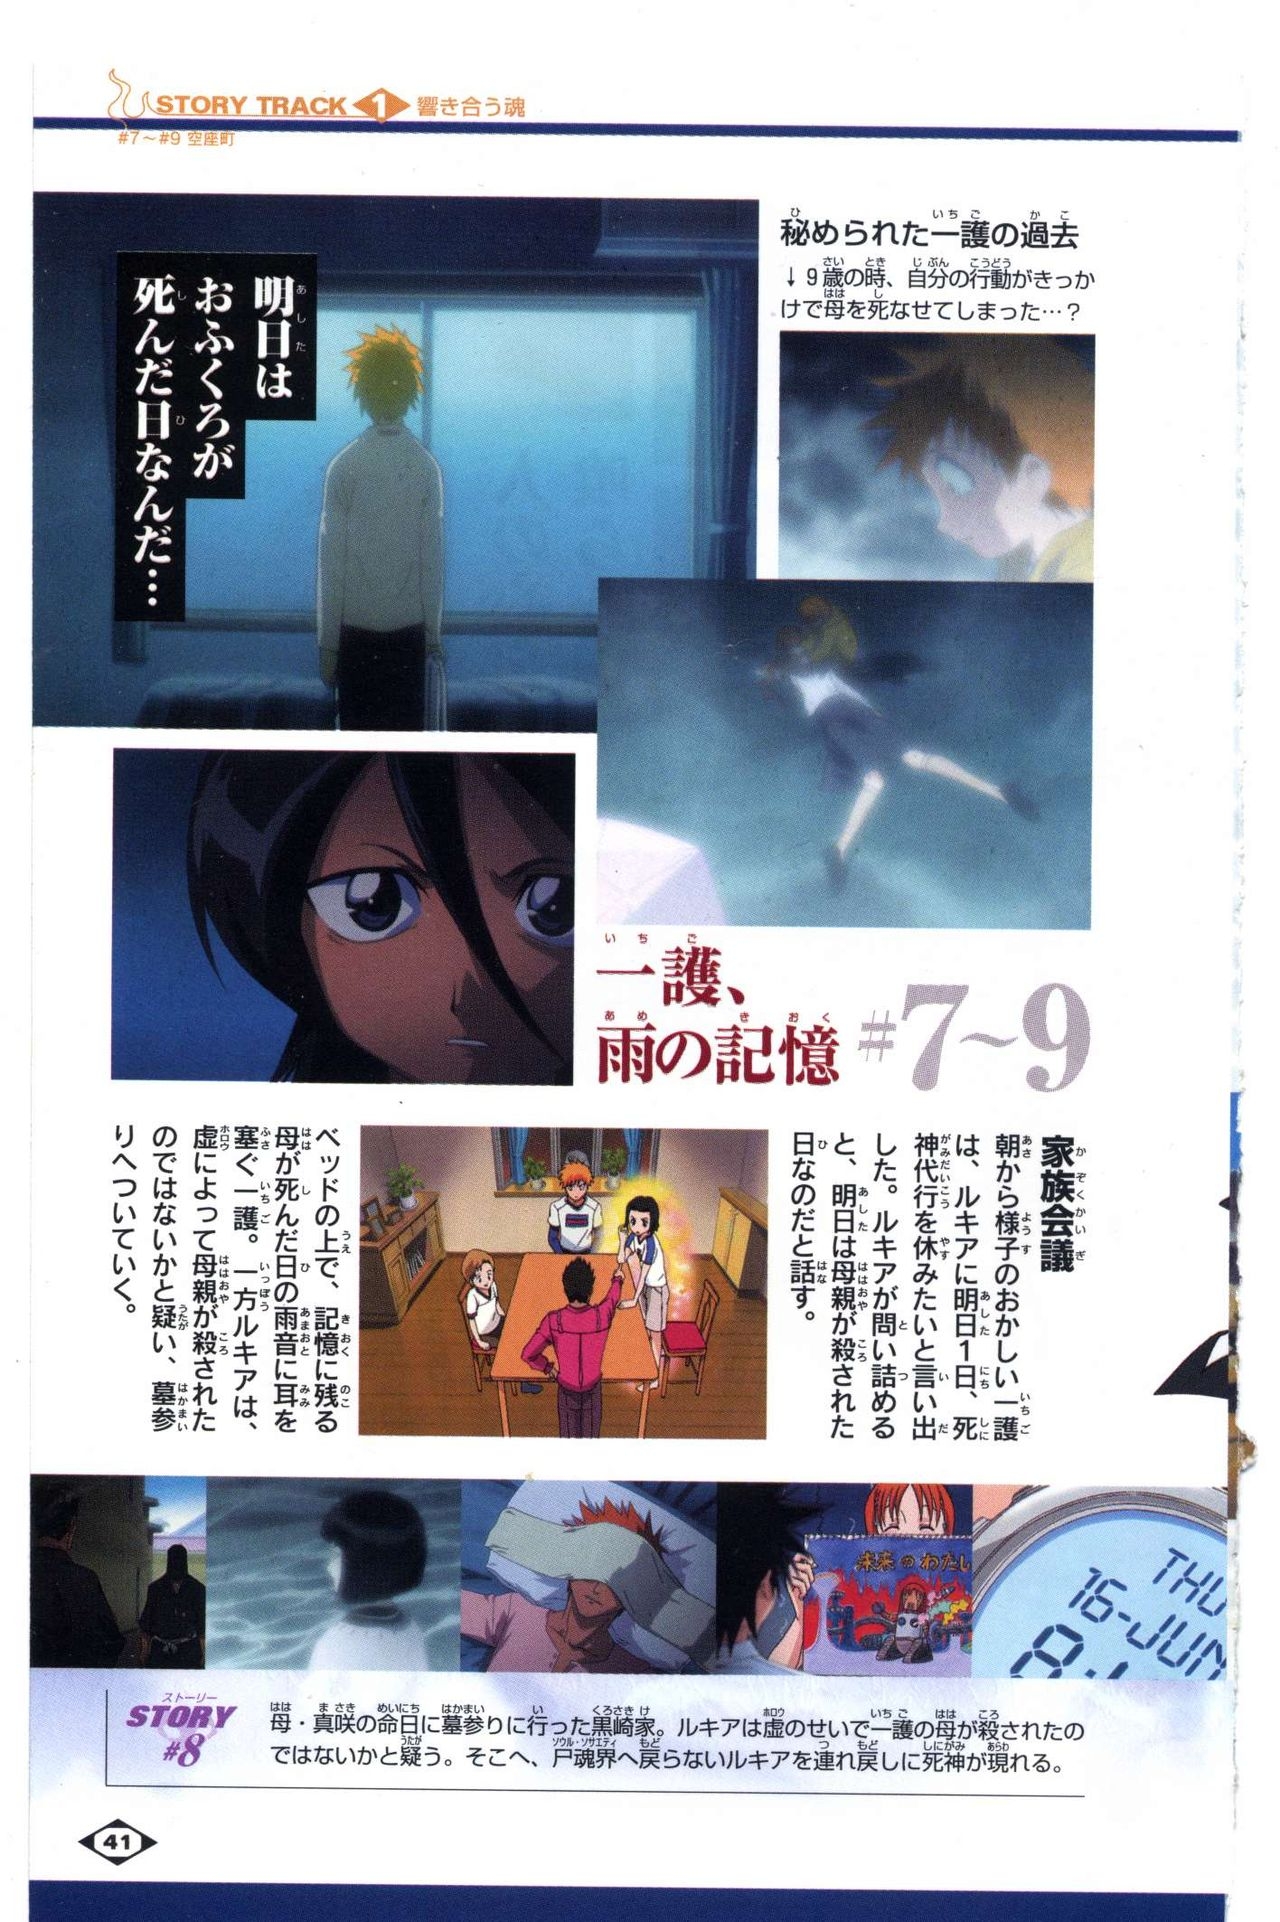 Bleach: Official Animation Book VIBEs 41